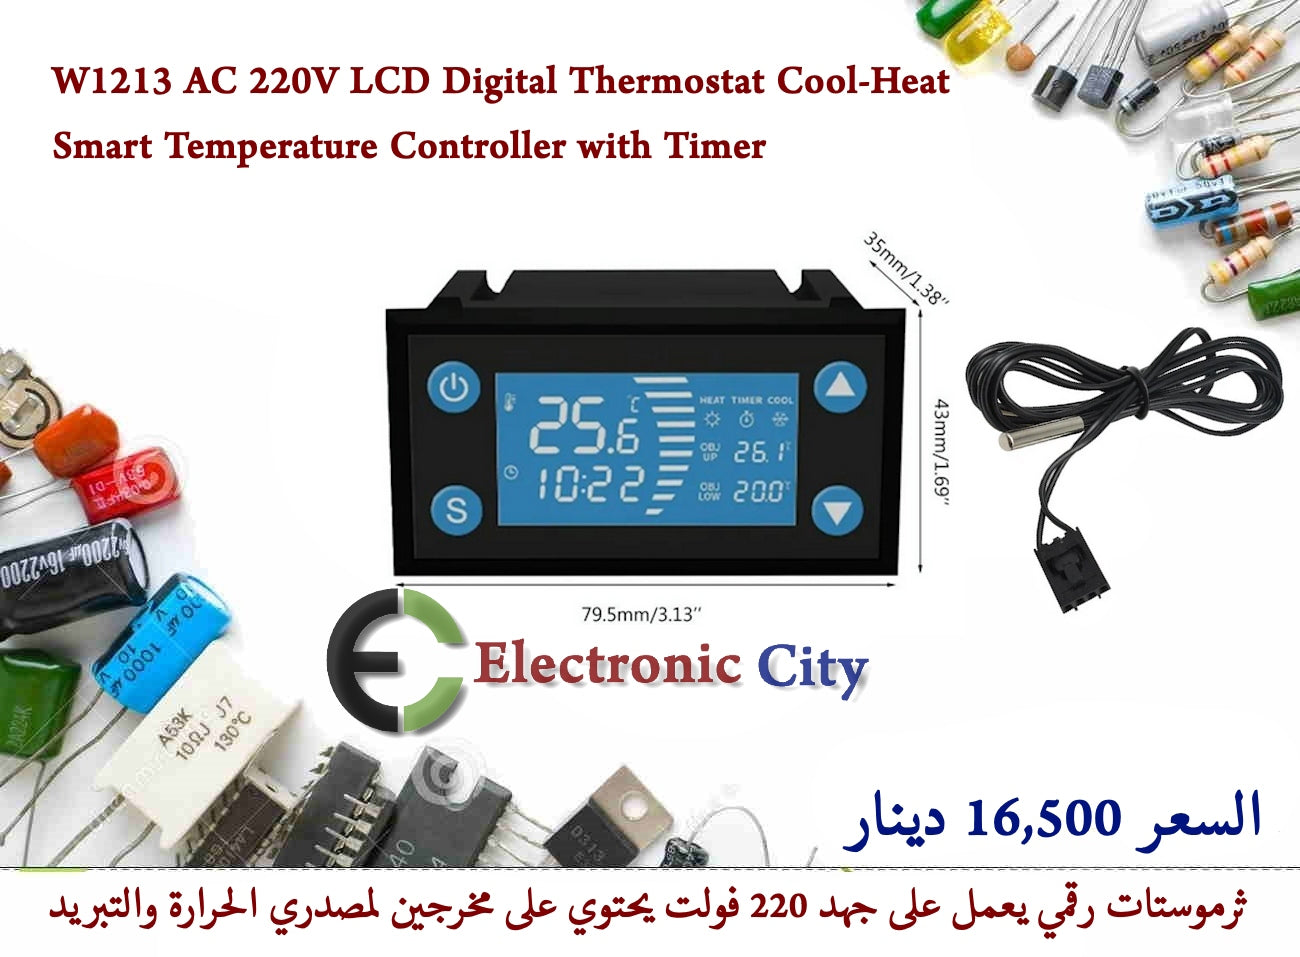 W1213 AC 220V LCD Digital Thermostat Cool-Heat Smart Temperature Controller with Timer  #KK